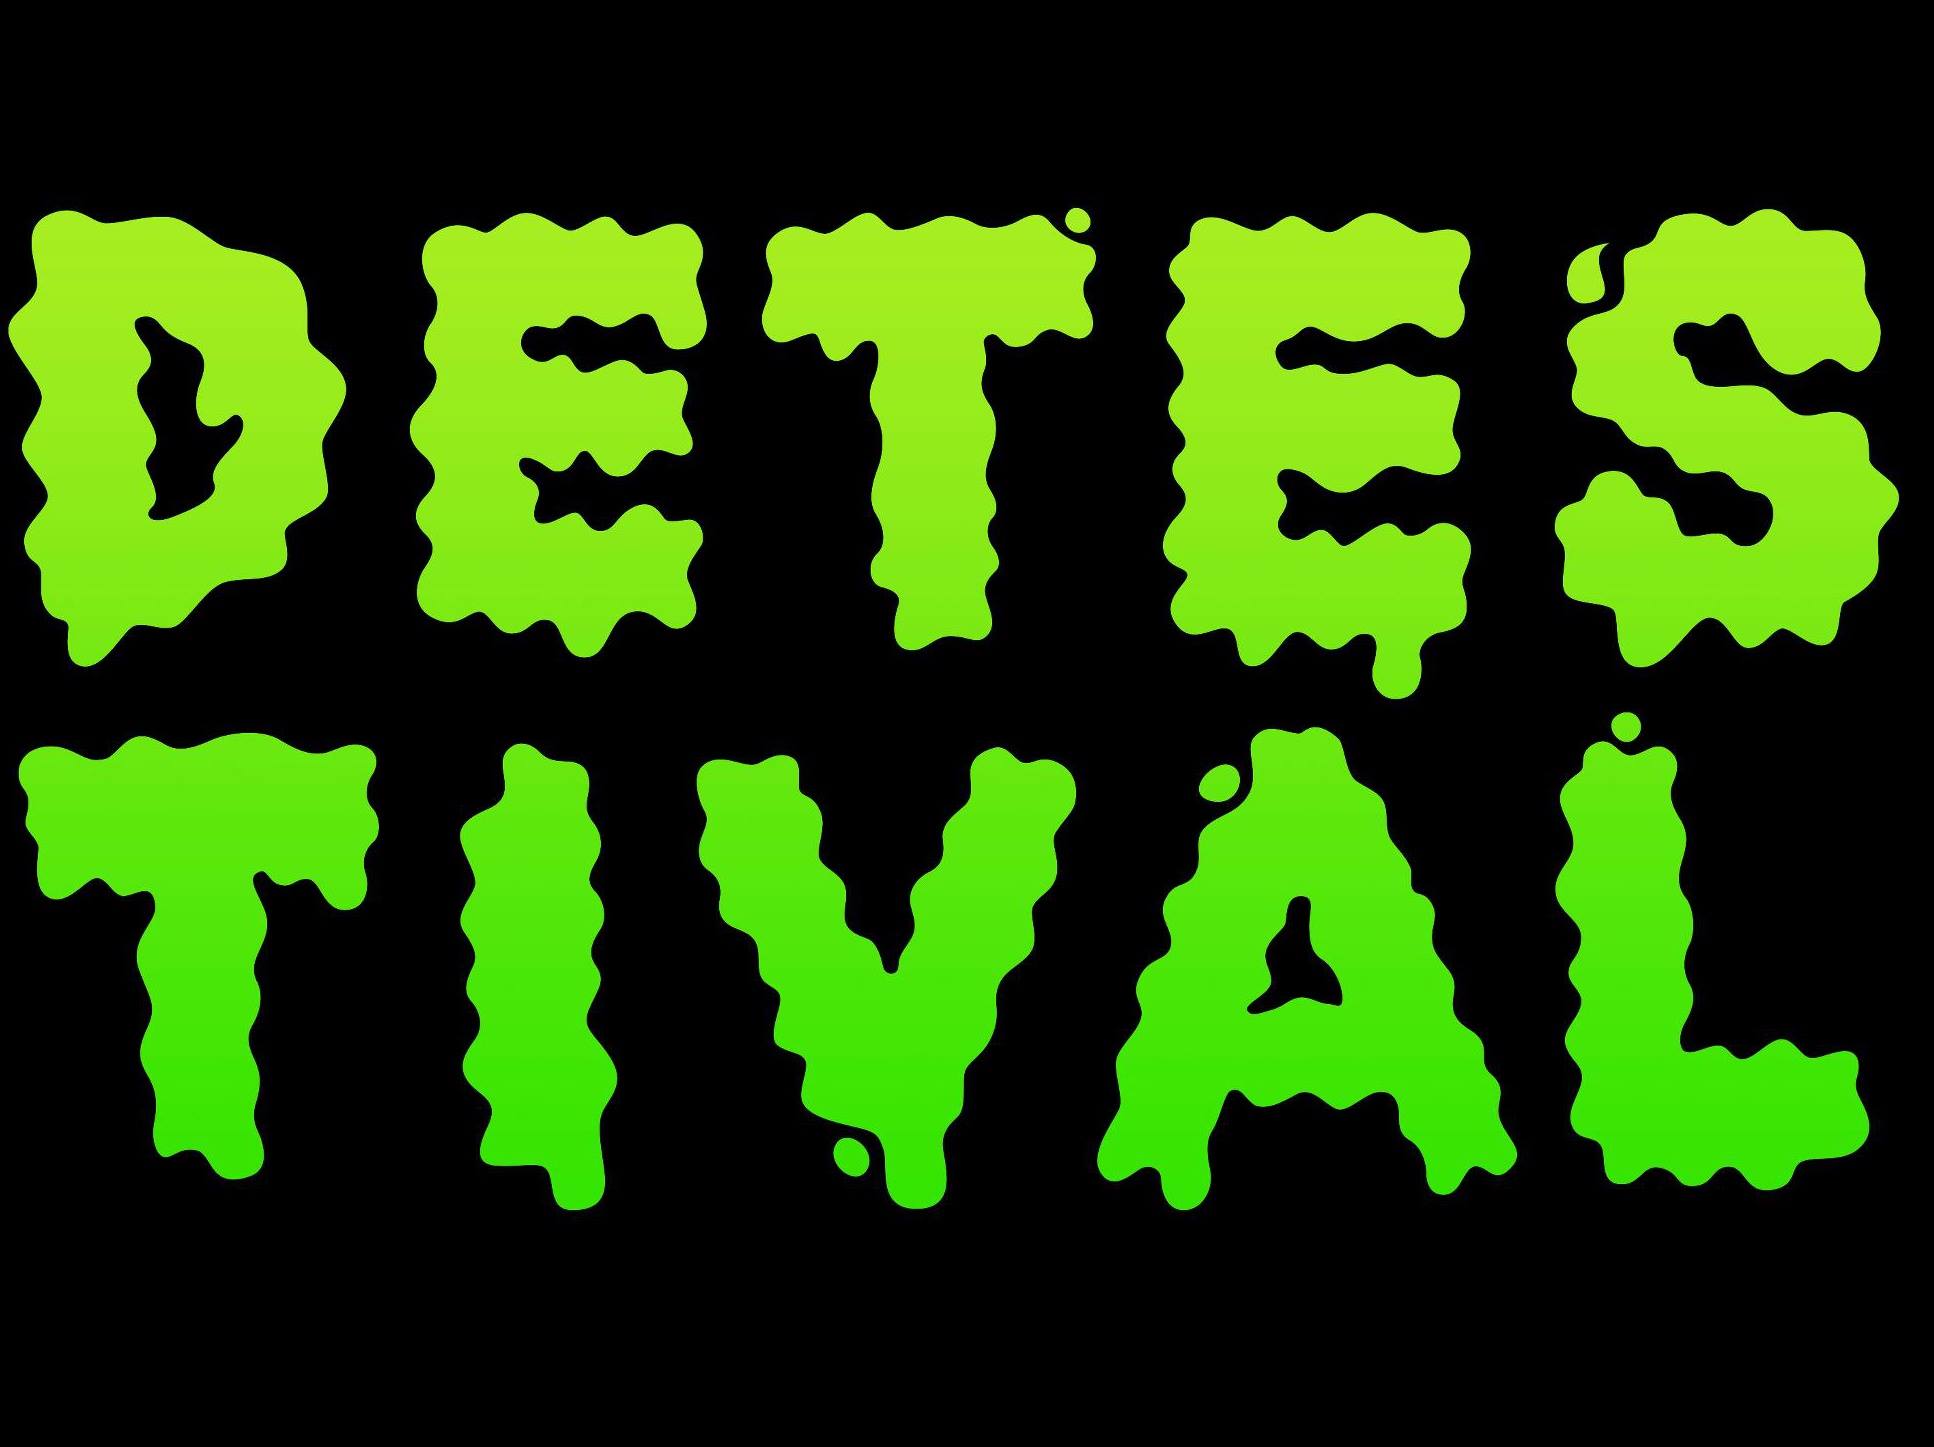 PREVIEW: Detestival – Queen’s Social Club, Sheffield, 18th to 20th April 2014 2